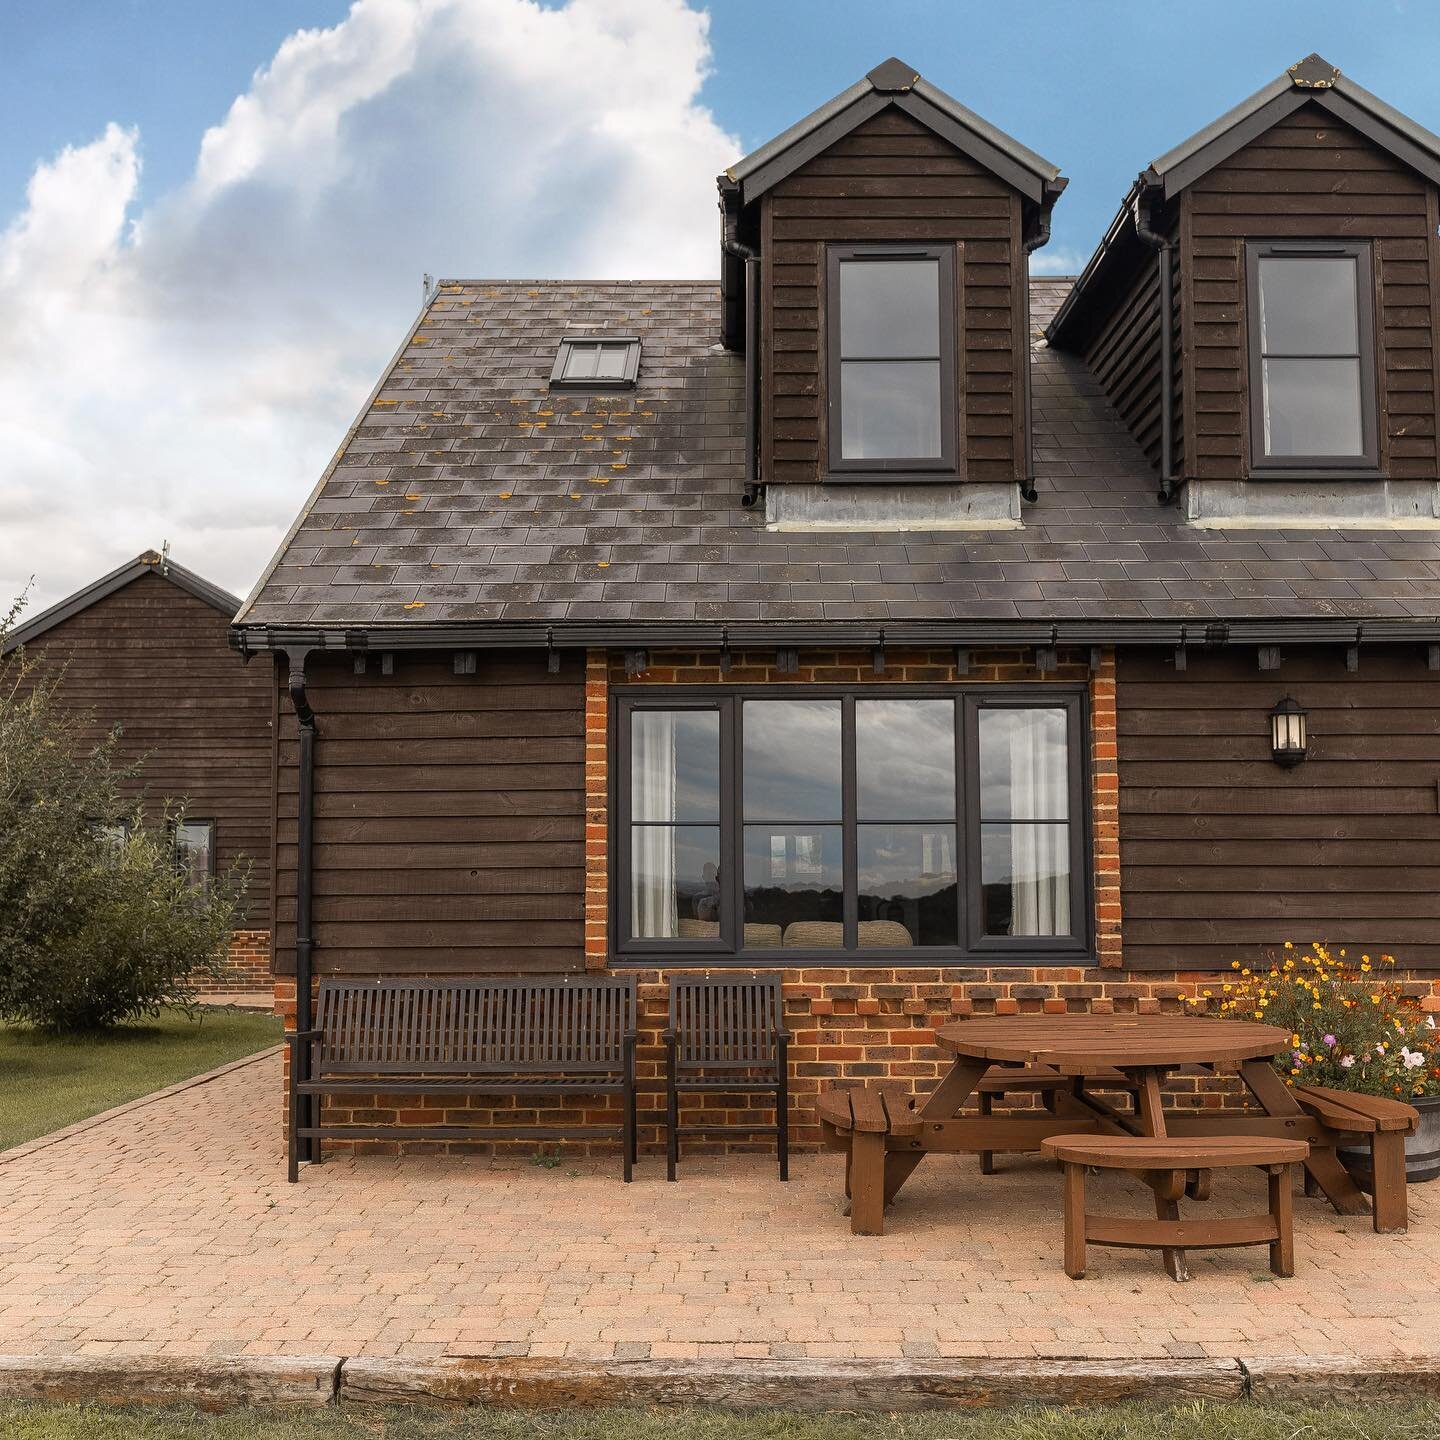 Three fun facts about Stable Cottages: 

🌿 They are located in St. Mary Hoo, a small, pretty hamlet north of Rochester on the Hoo Peninsula lying between the River Thames and the River Medway. 

🌿 They were built 20 years ago by owner Jason (a seri